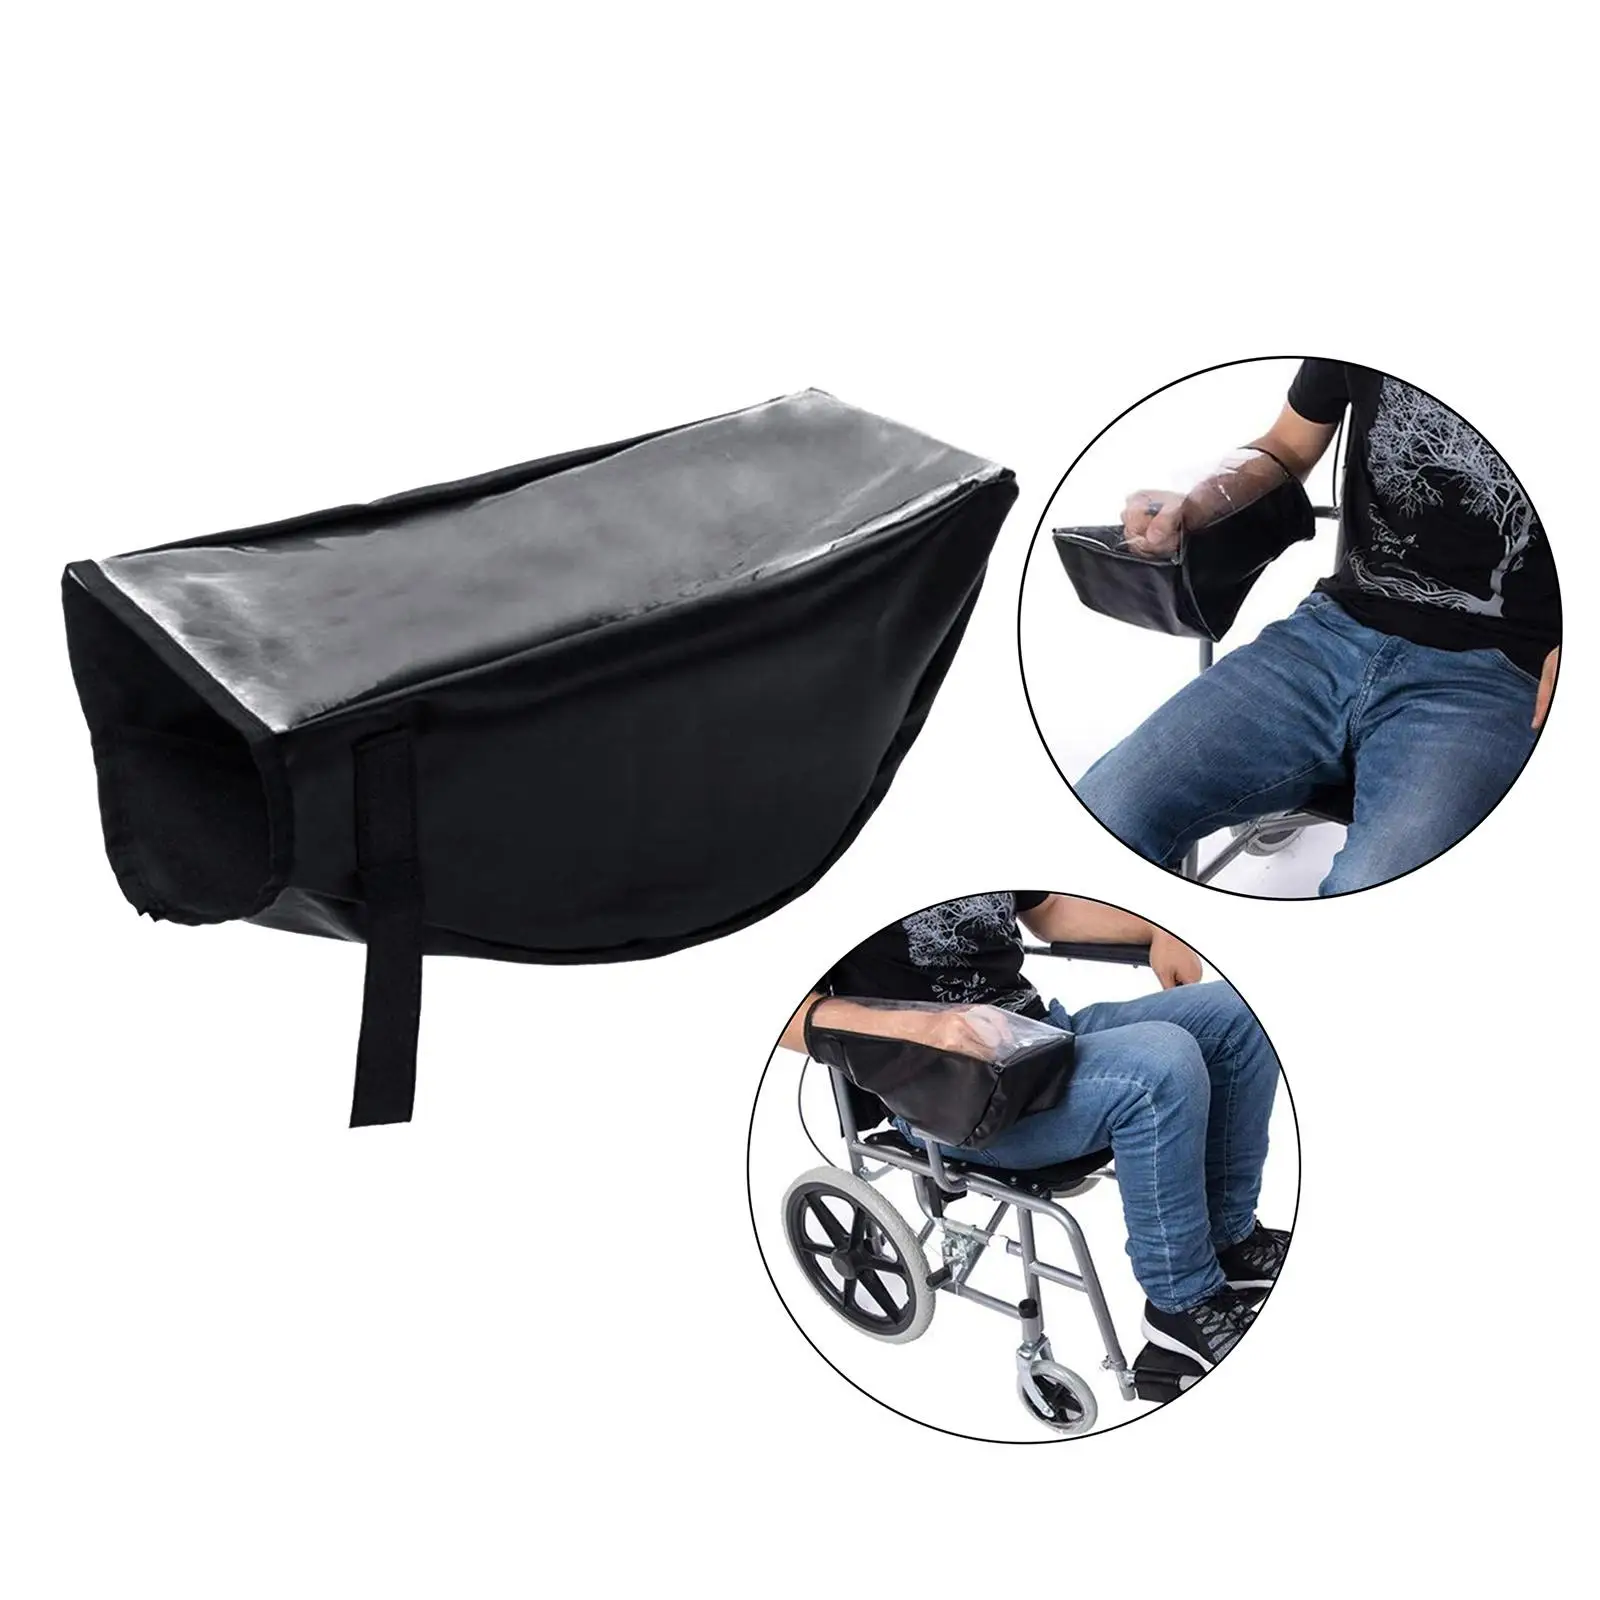 Power Wheel Chair Joystick Control Panel Armrest Cover for Waterproof